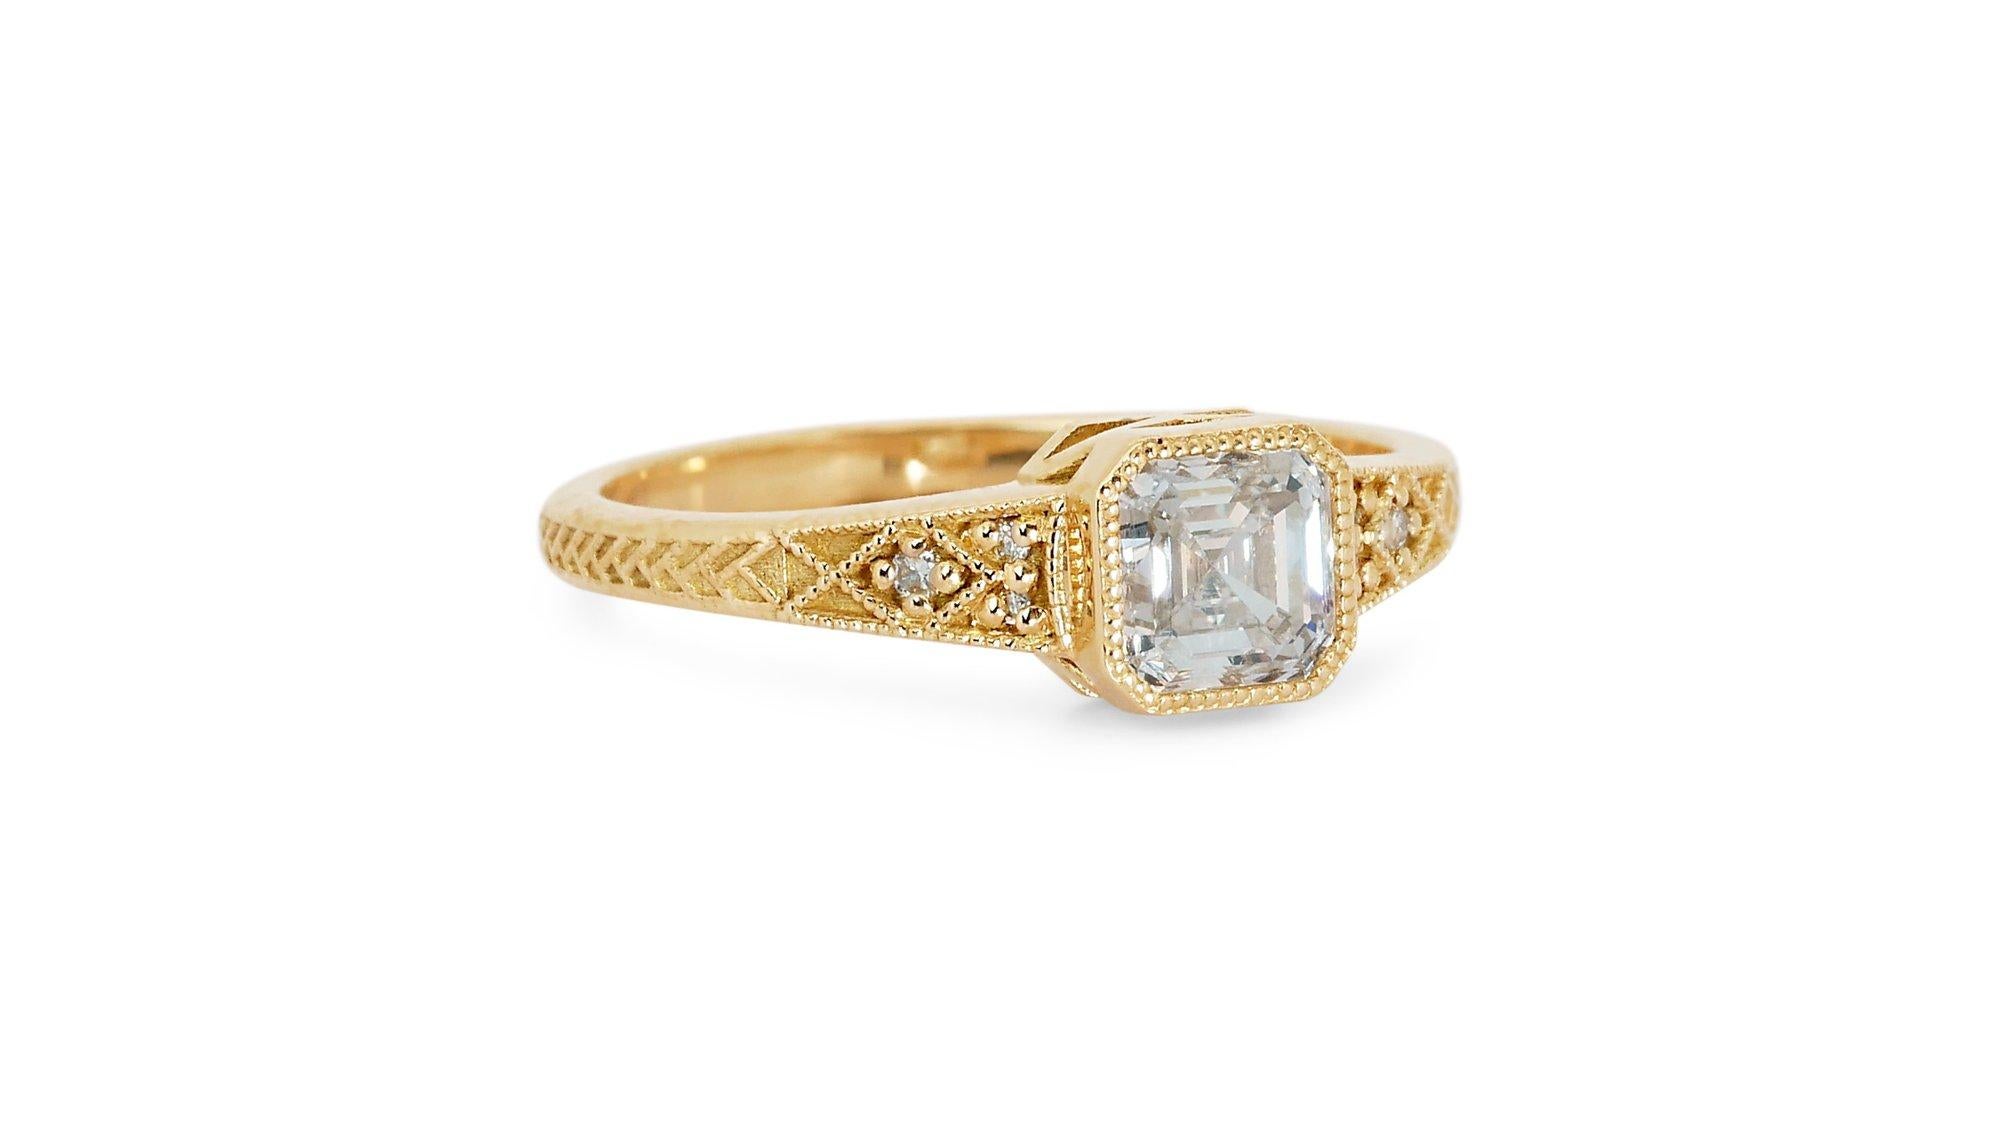 Square Cut Lustrous 1.04ct Diamond Pave Ring in 18k Yellow Gold - GIA Certified For Sale